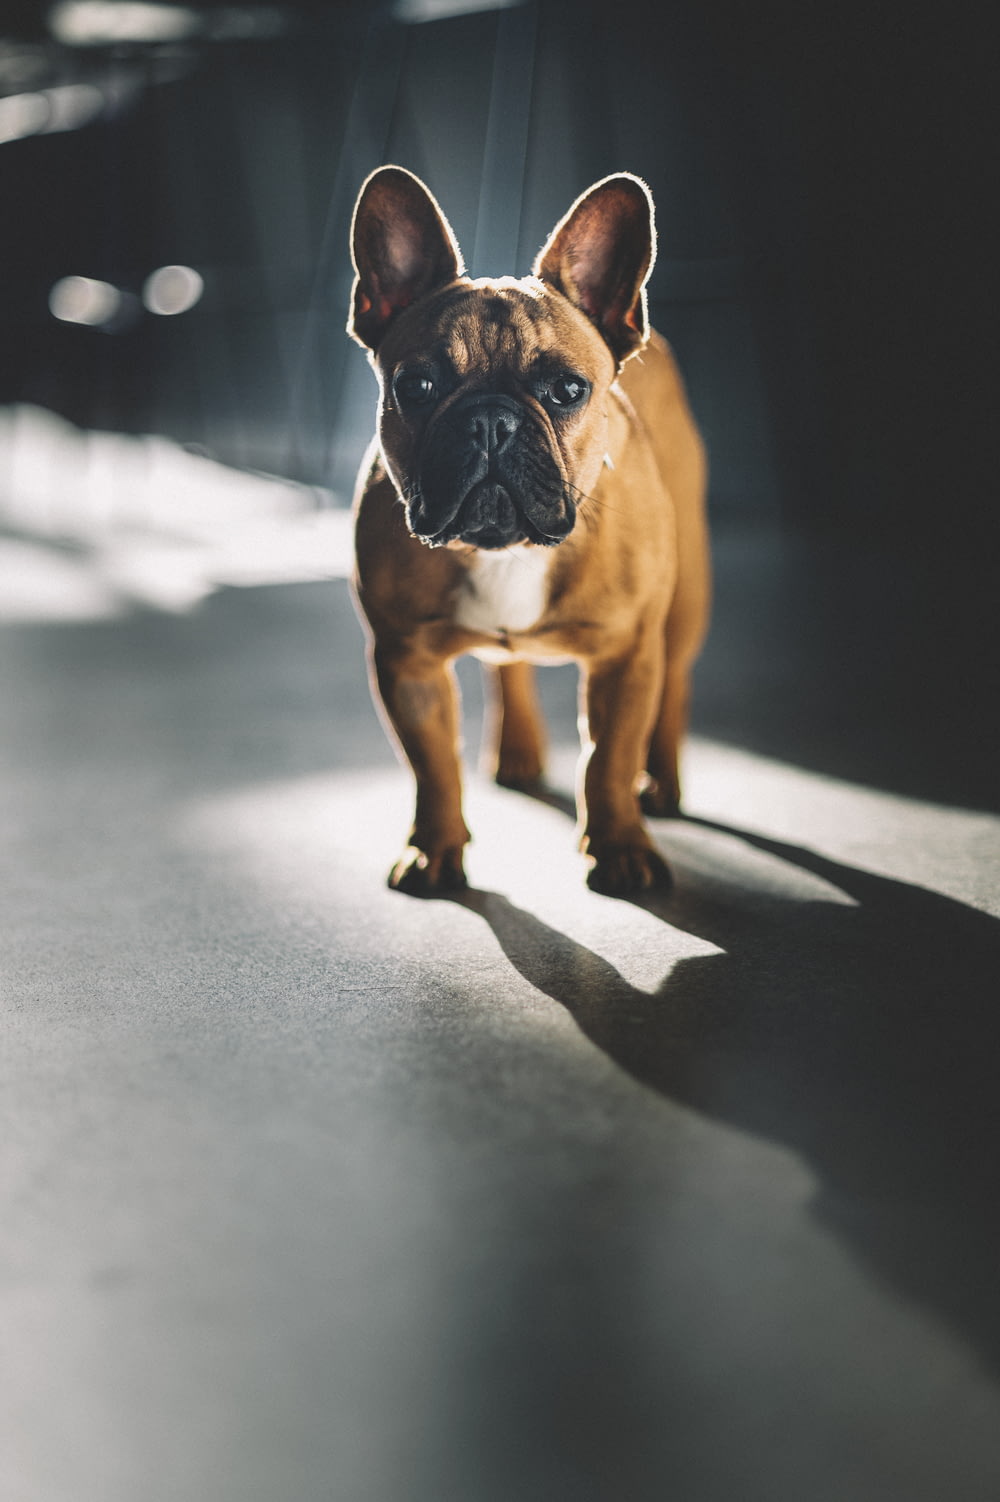 brown and white short coated dog on gray concrete floor